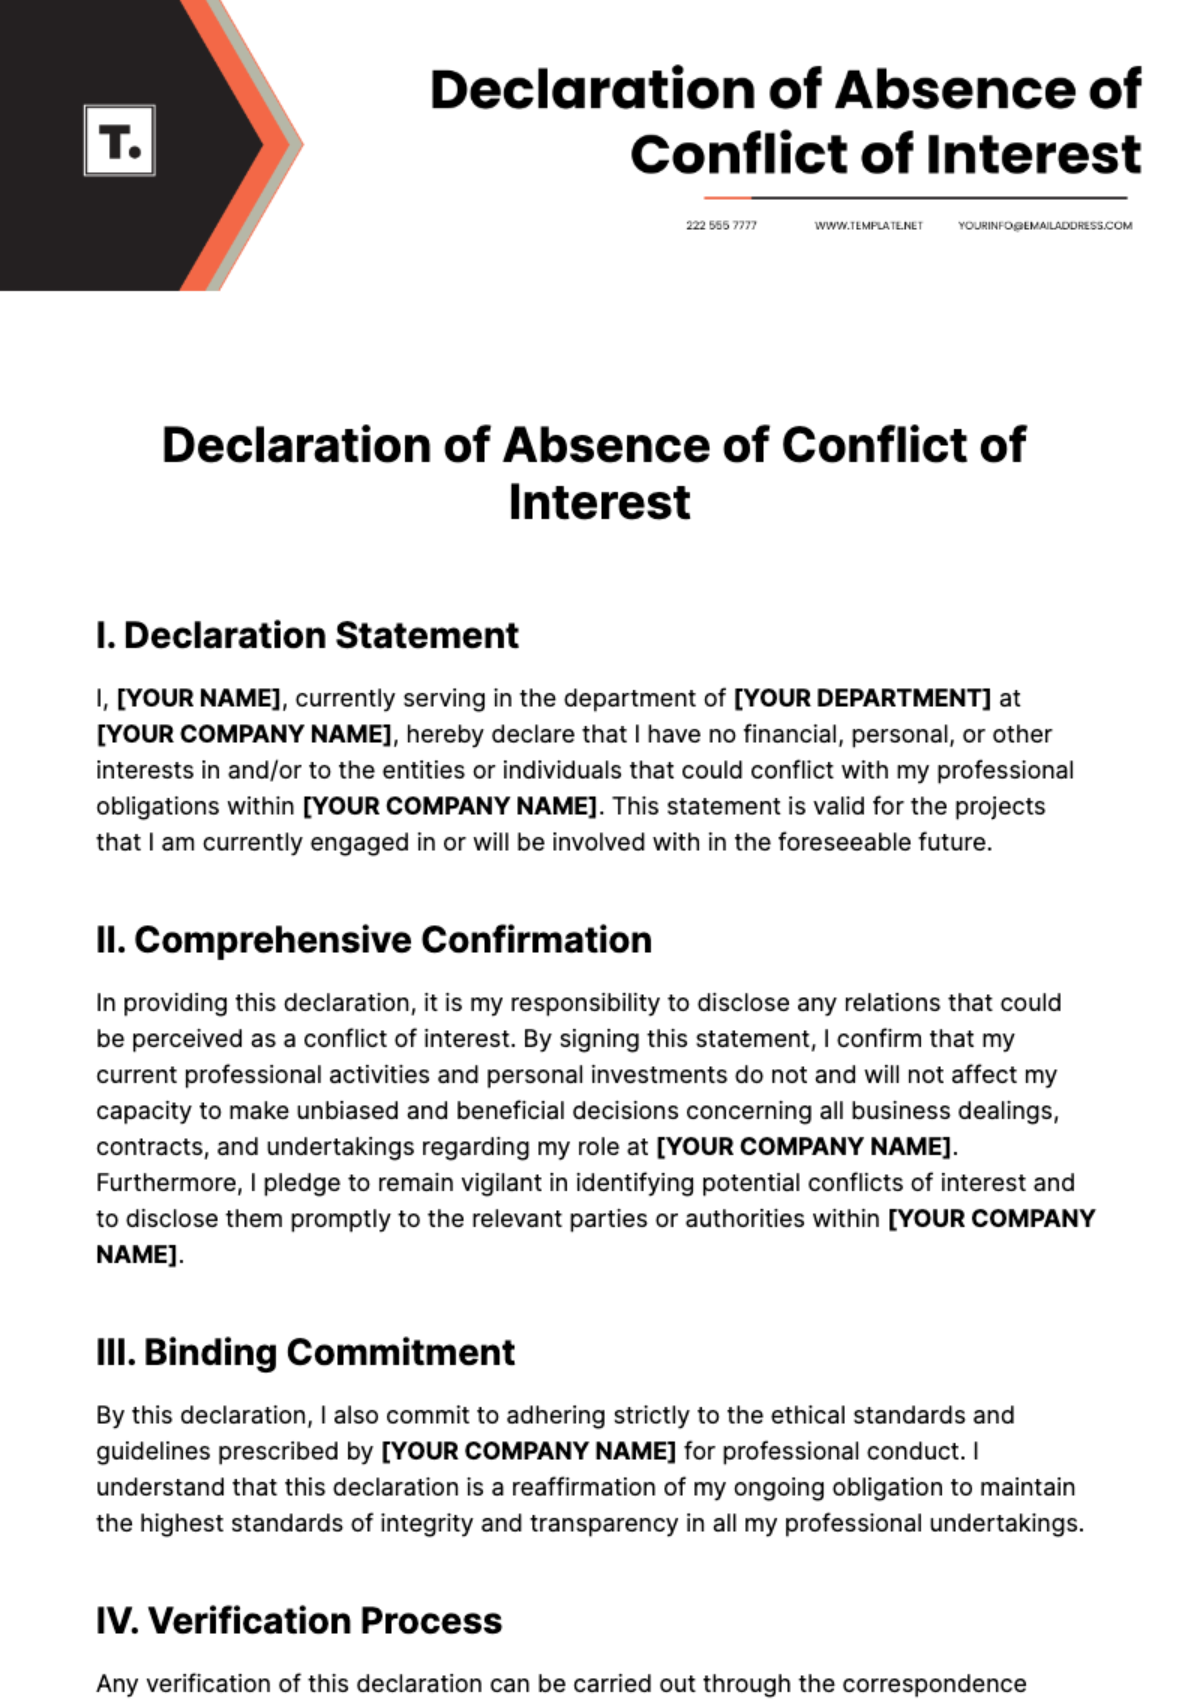 Declaration of Absence of Conflict of Interest Template